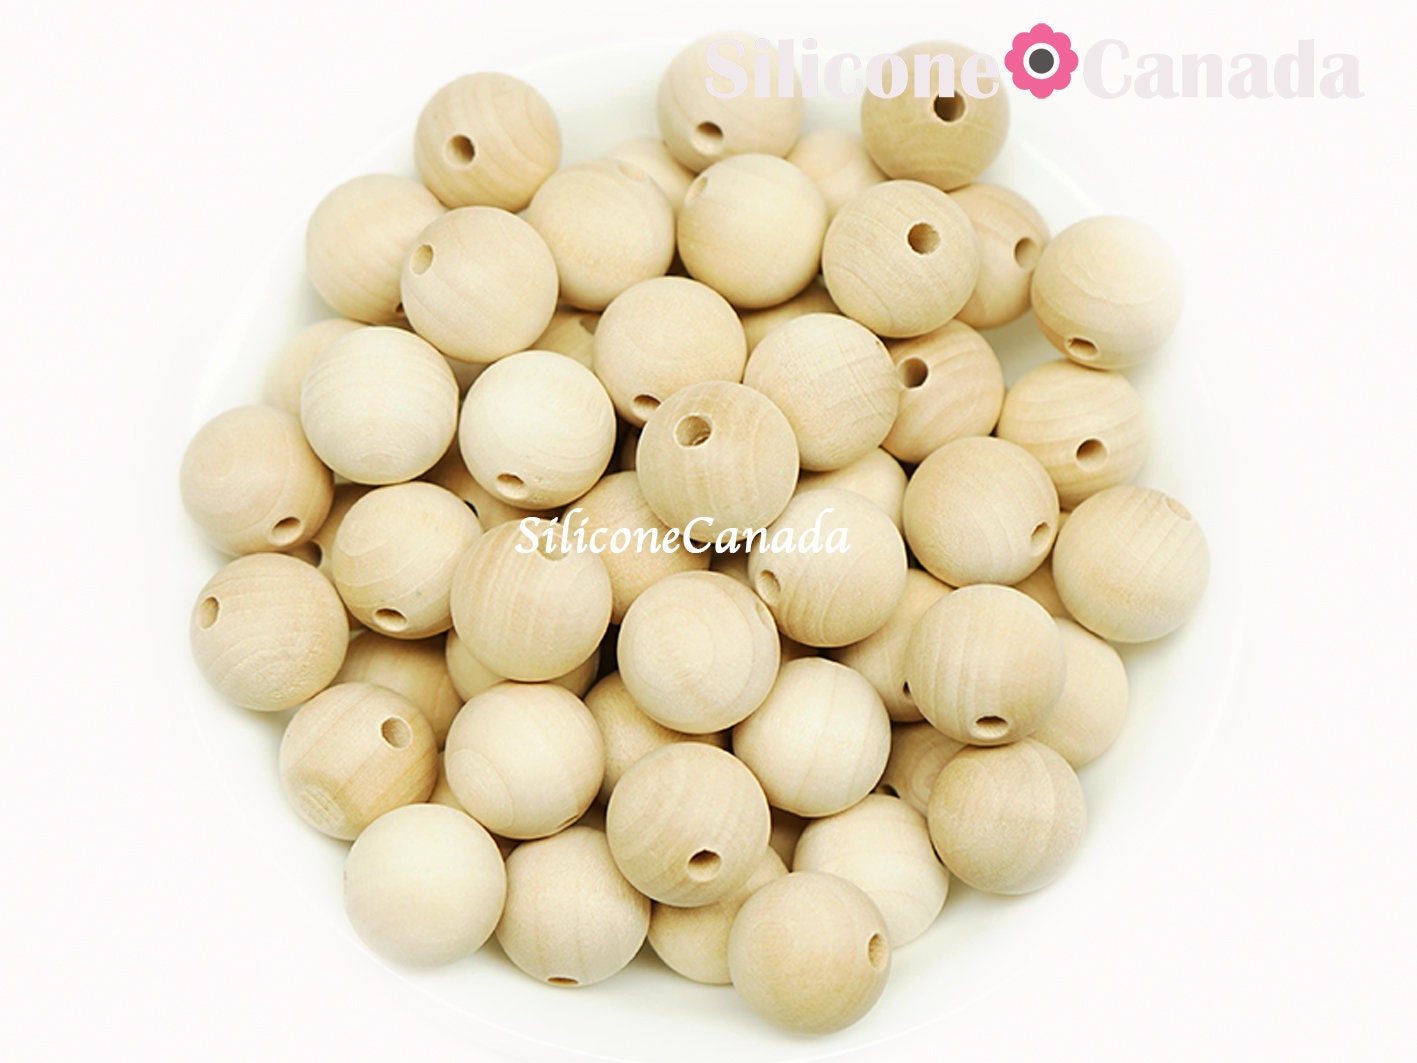 8mm Round Unfinished Wood Beads Small Wooden Craft Beads for